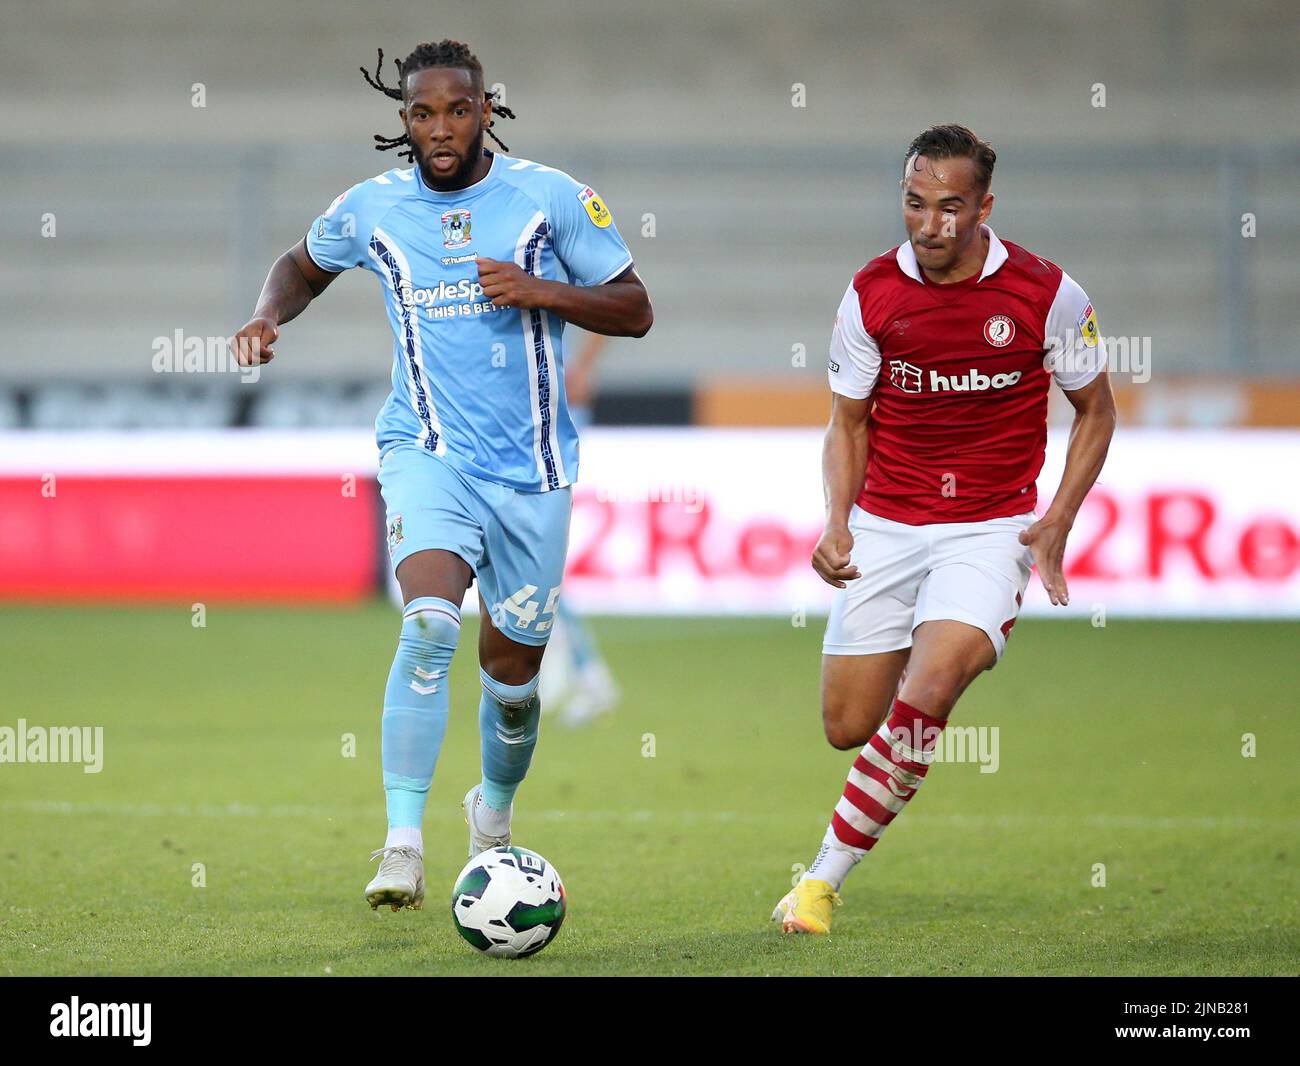 Coventry City's Kasey Palmer (left) and Bristol City's Kane Wilson battle for the ball during the Carabao Cup, first round match at the Pirelli Stadium, Burton upon Trent. Picture date: Wednesday August 10, 2022. Stock Photo